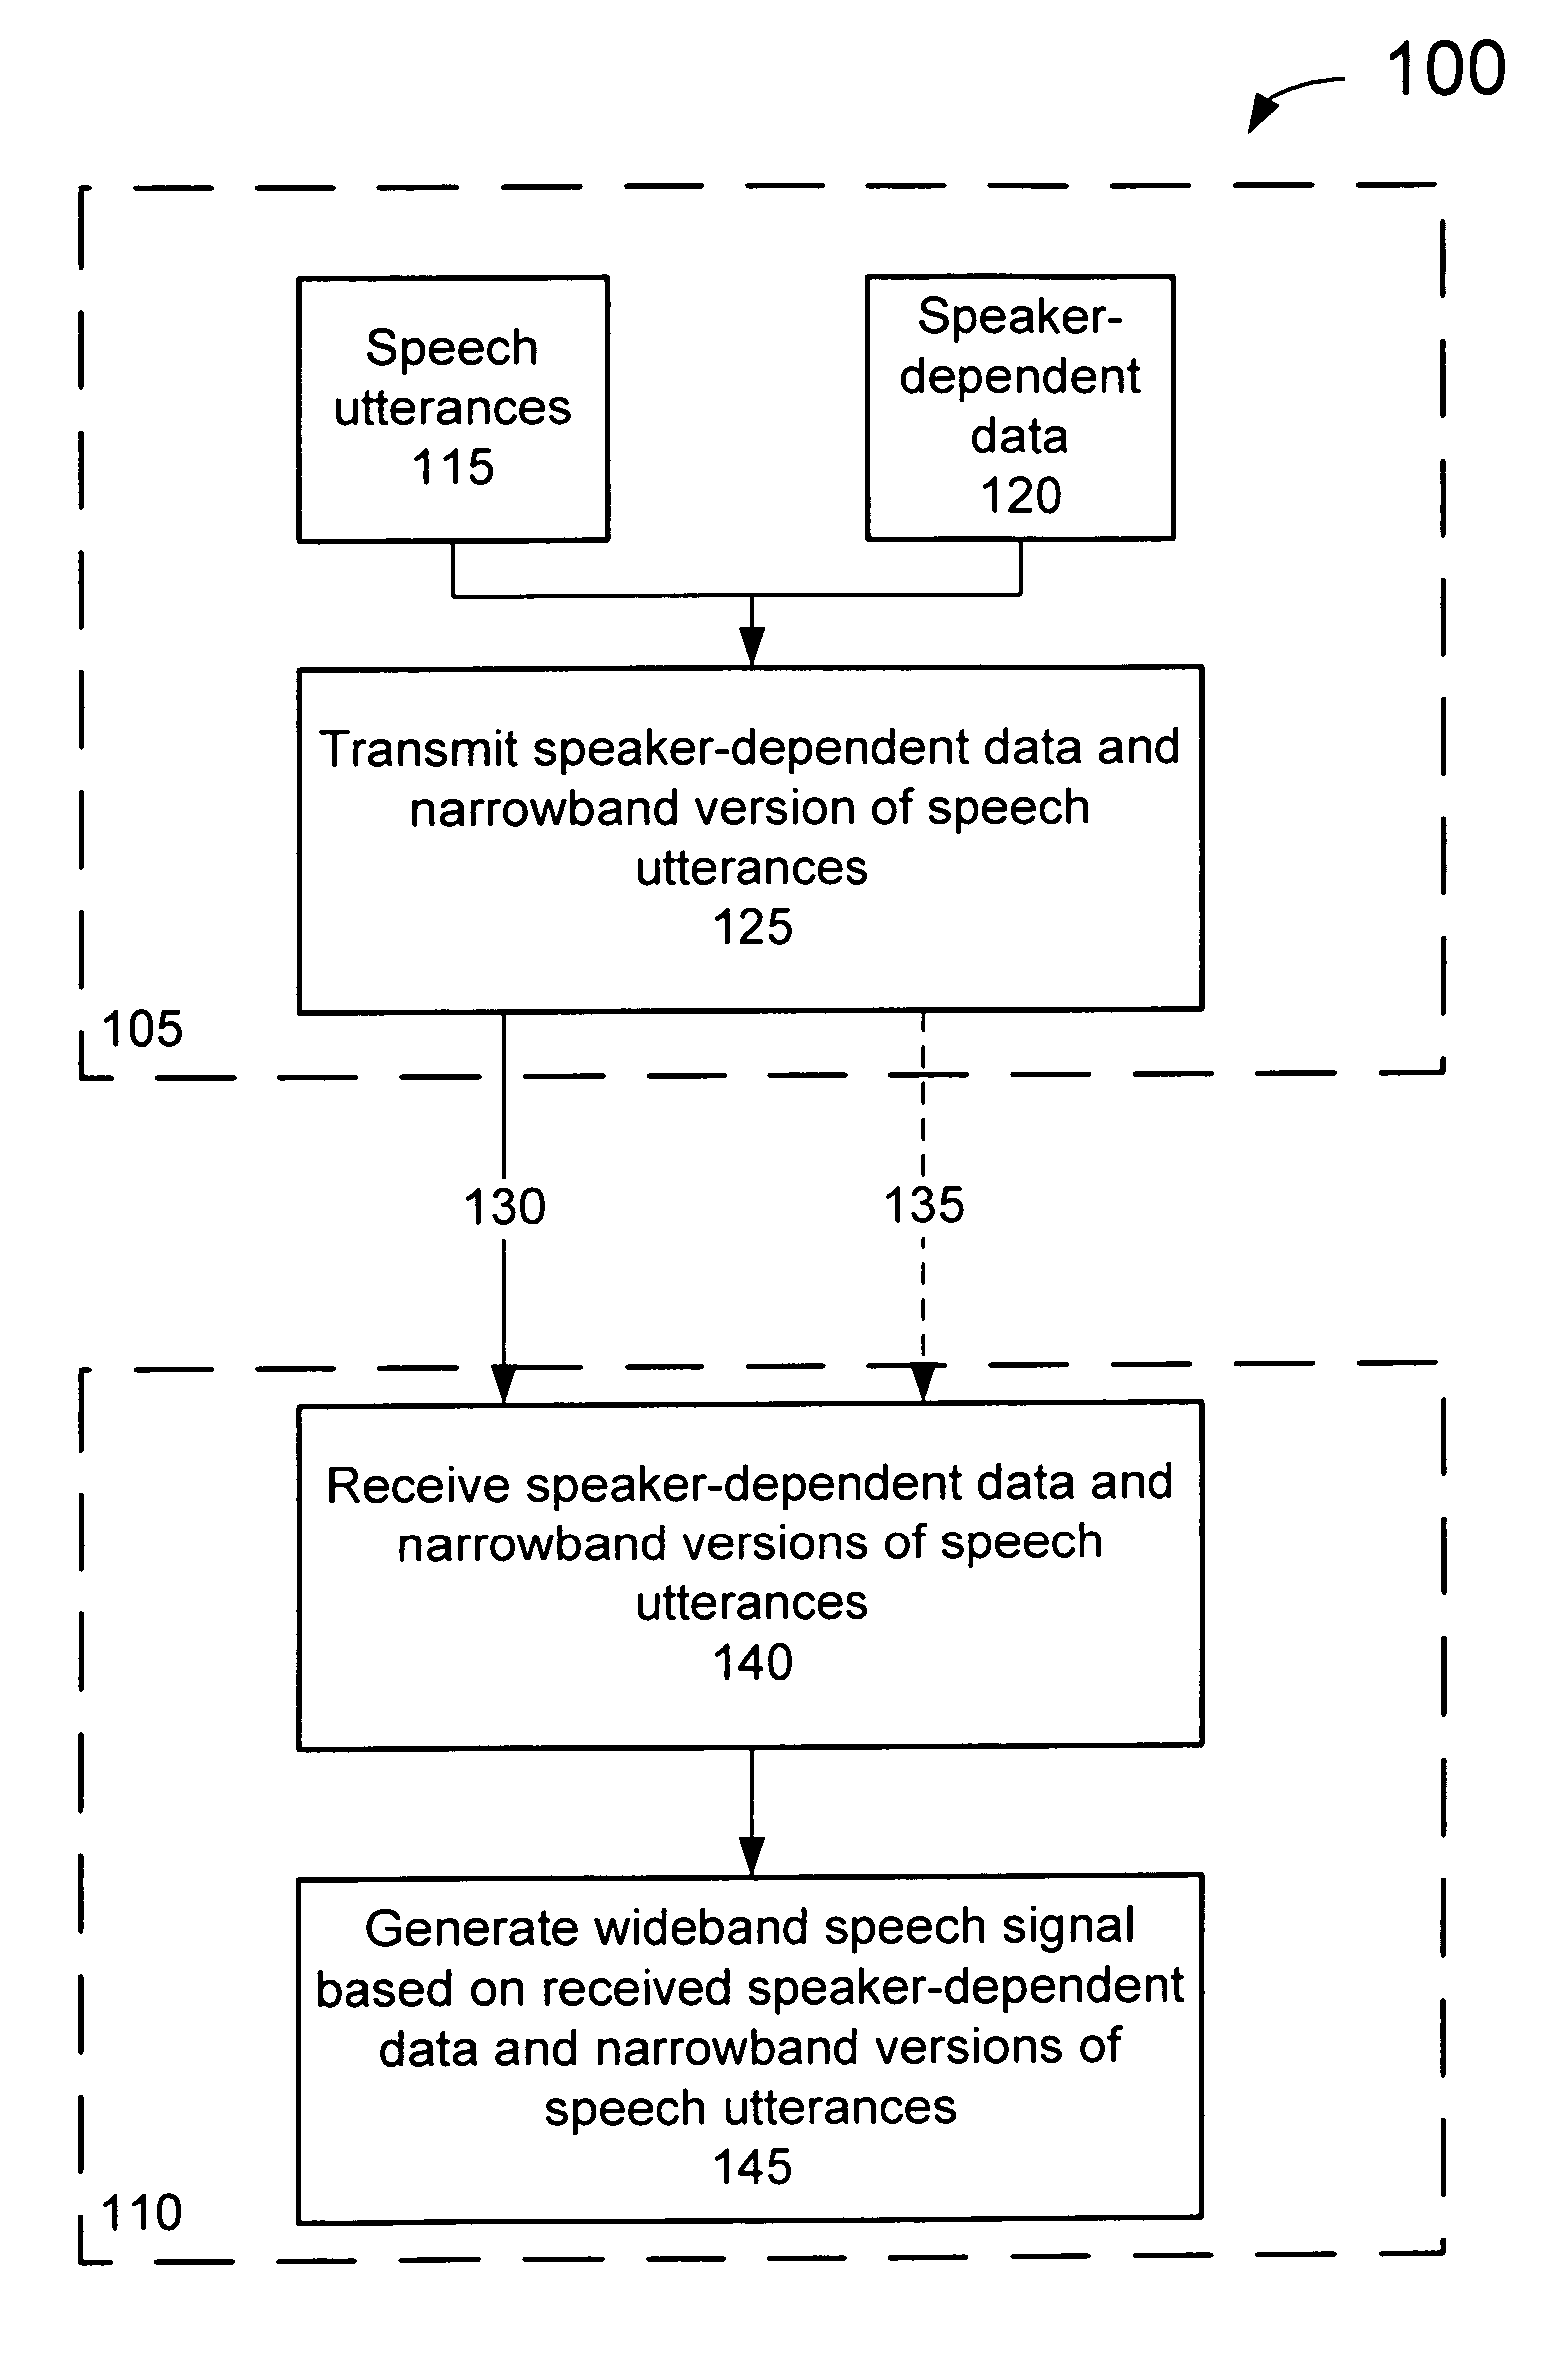 System for generating a wideband signal from a narrowband signal using transmitted speaker-dependent data